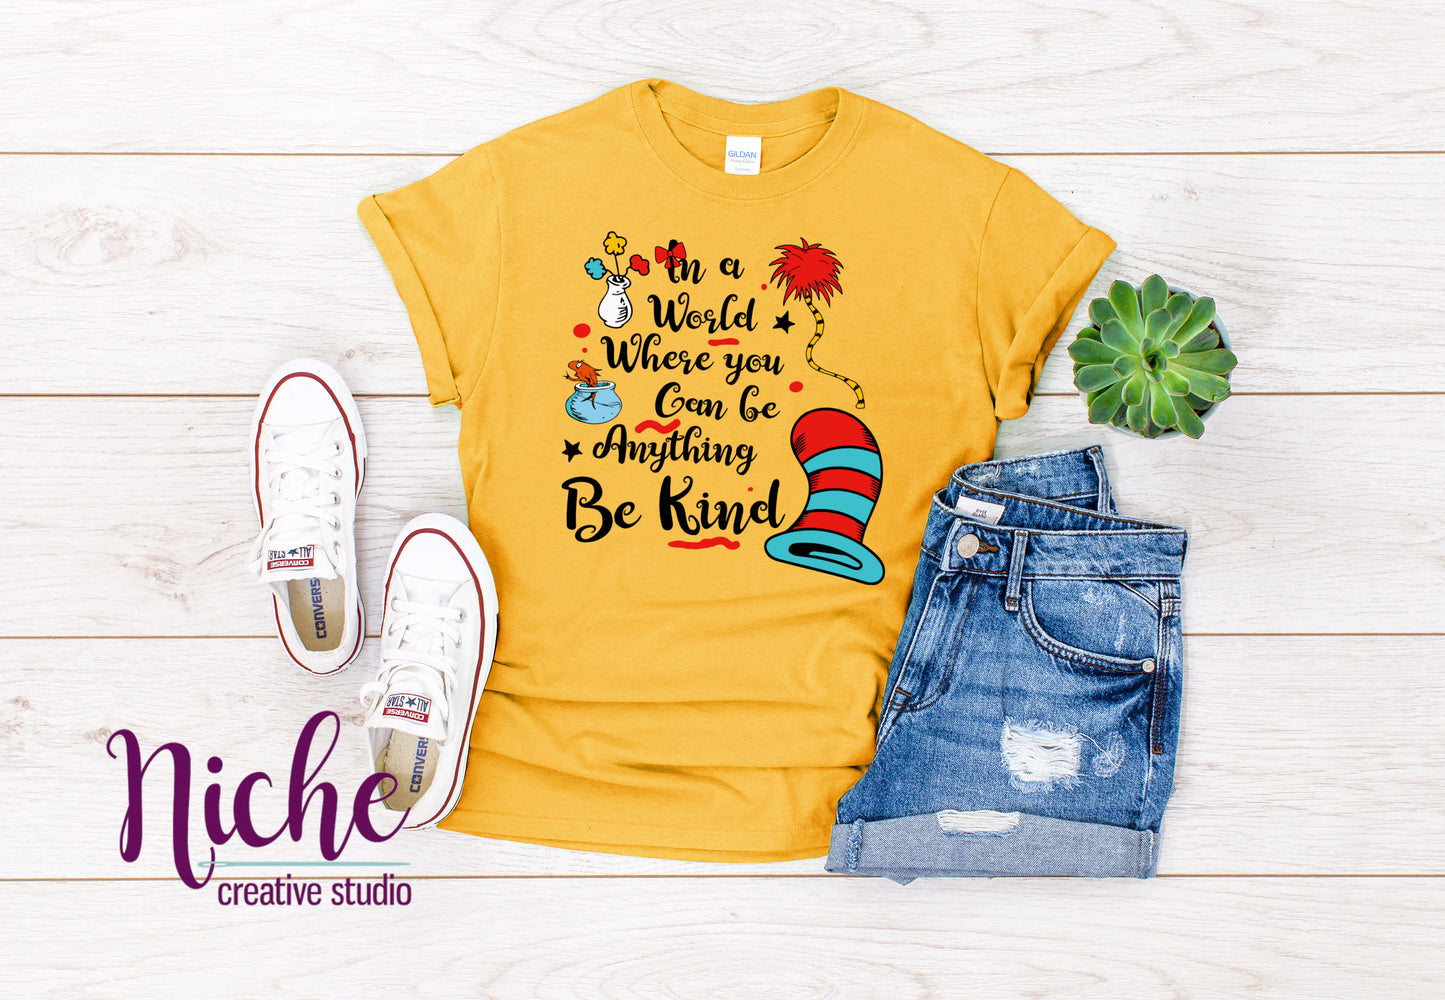 -DRS1596 In a World, Be Kind Decal